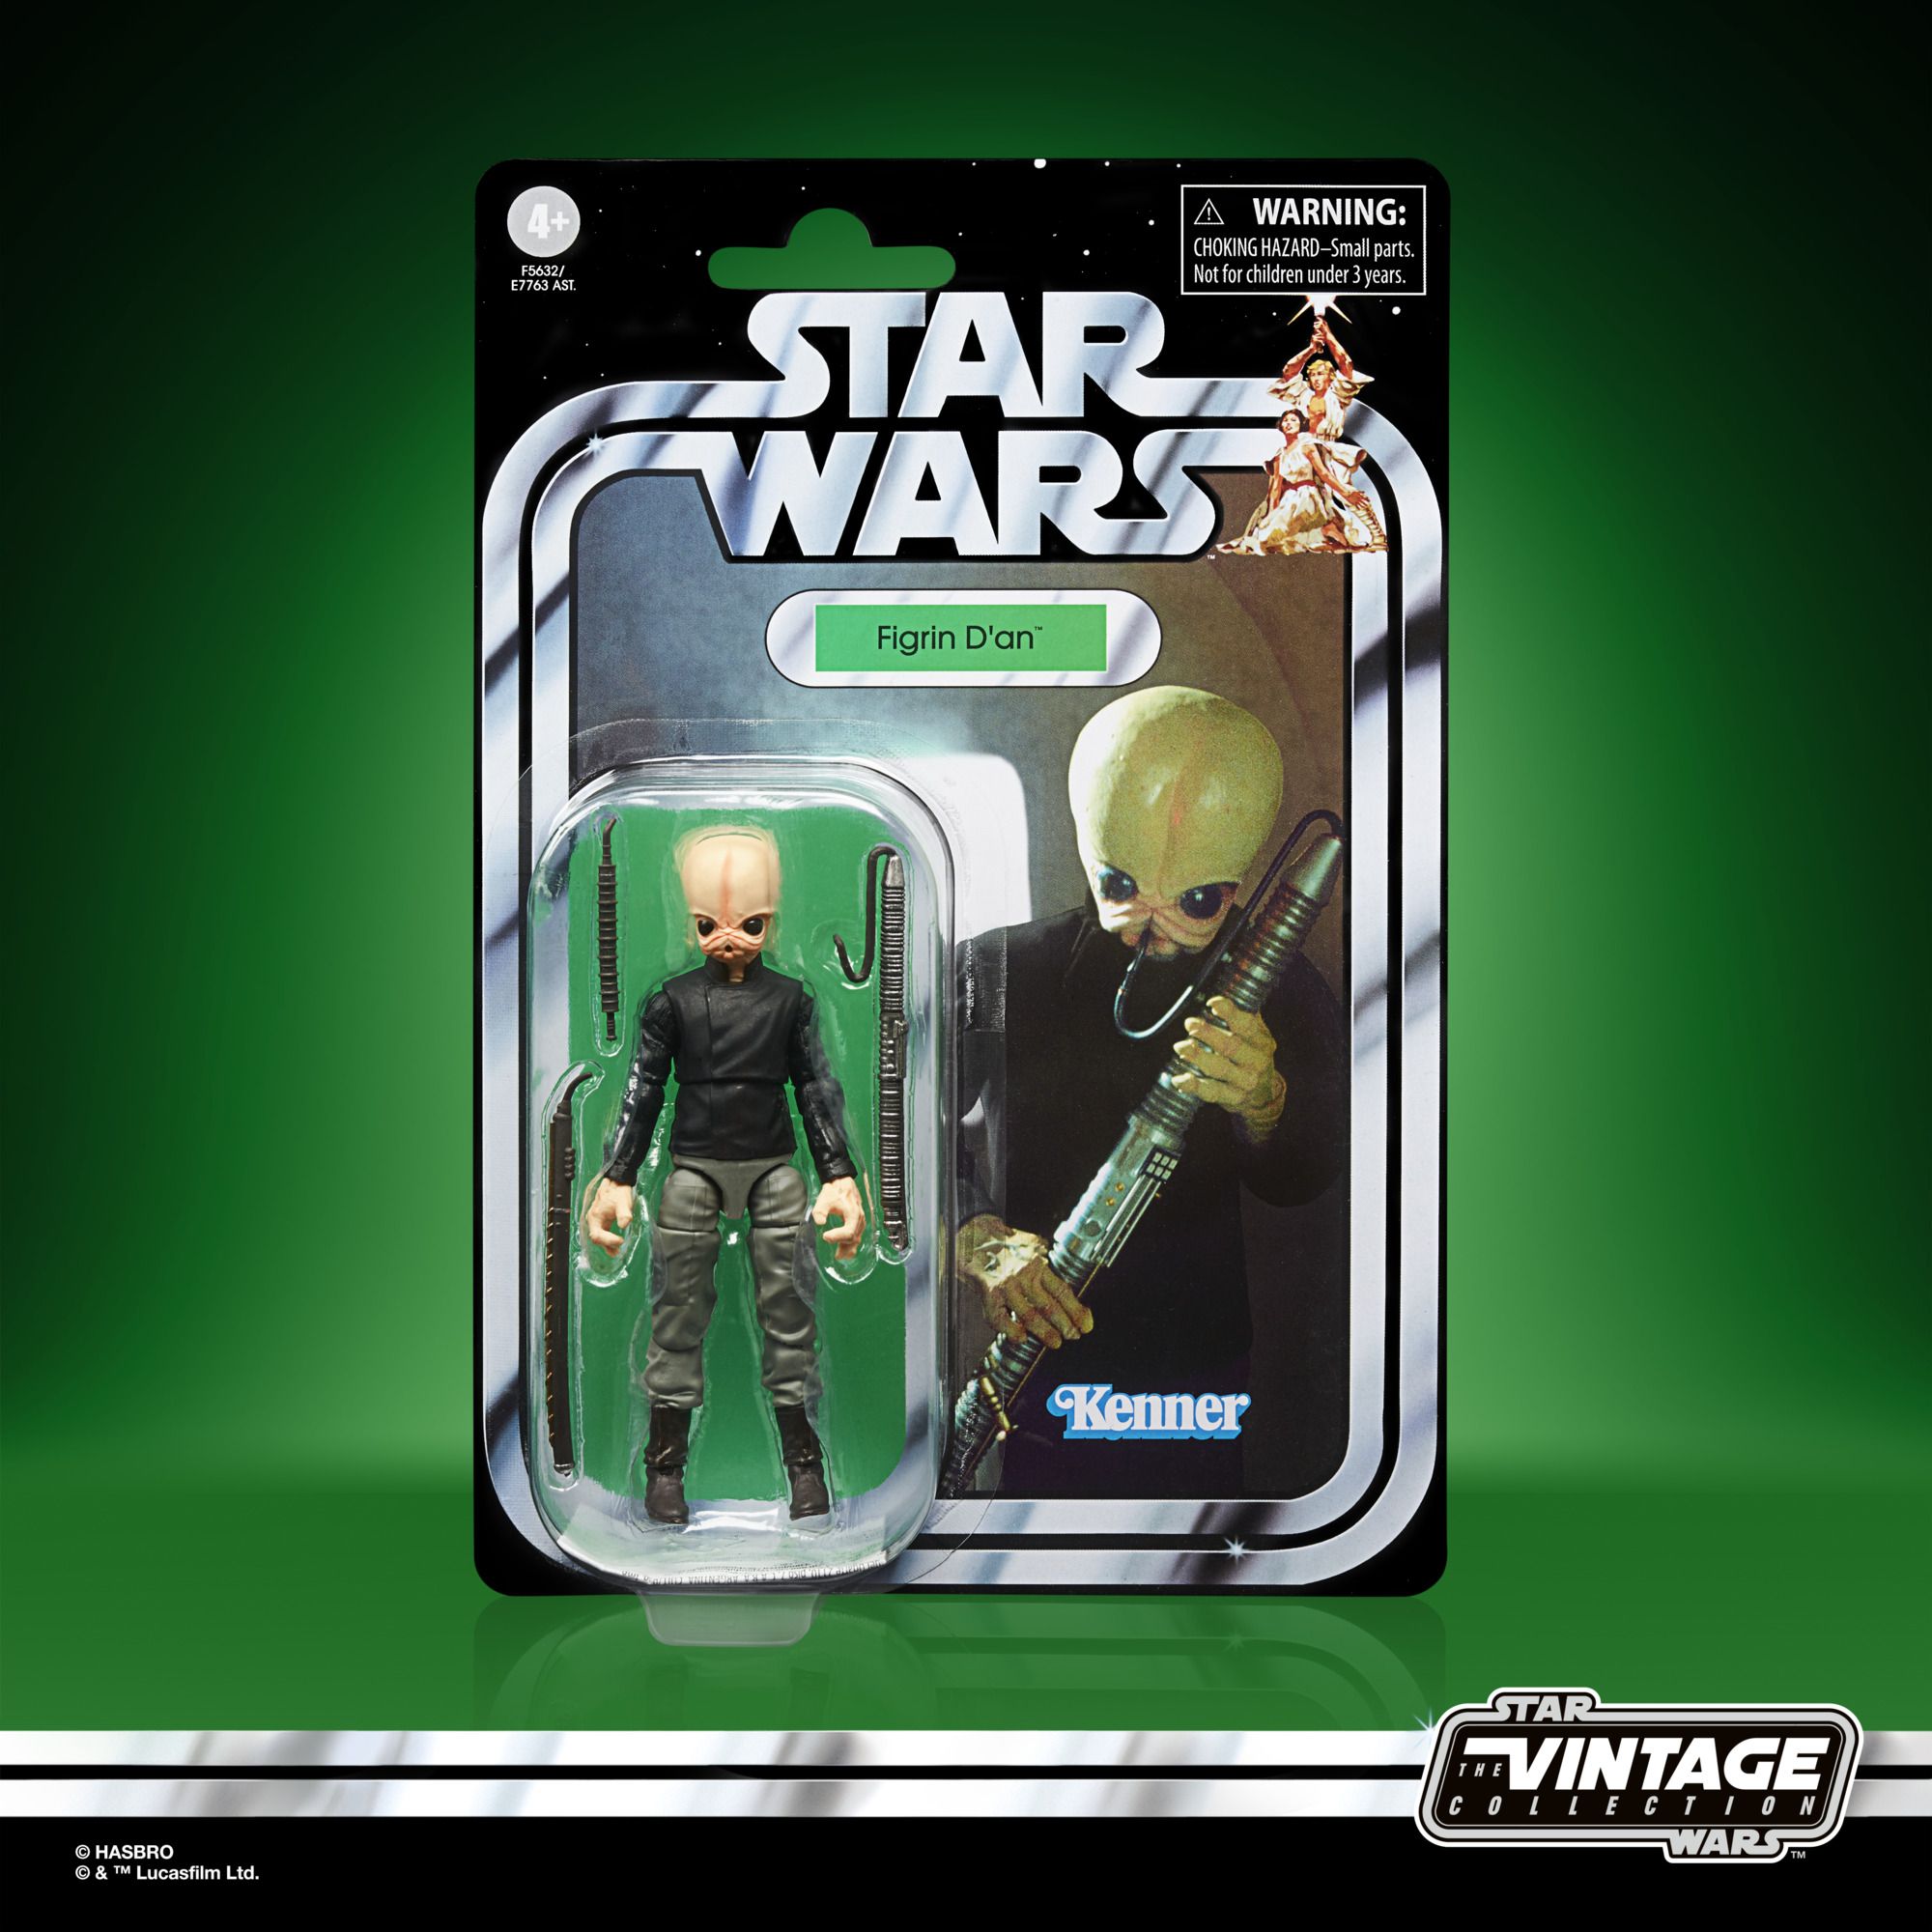 STAR WARS THE VINTAGE COLLECTION 3.75-INCH FIGRIN D’AN Figure (Package)